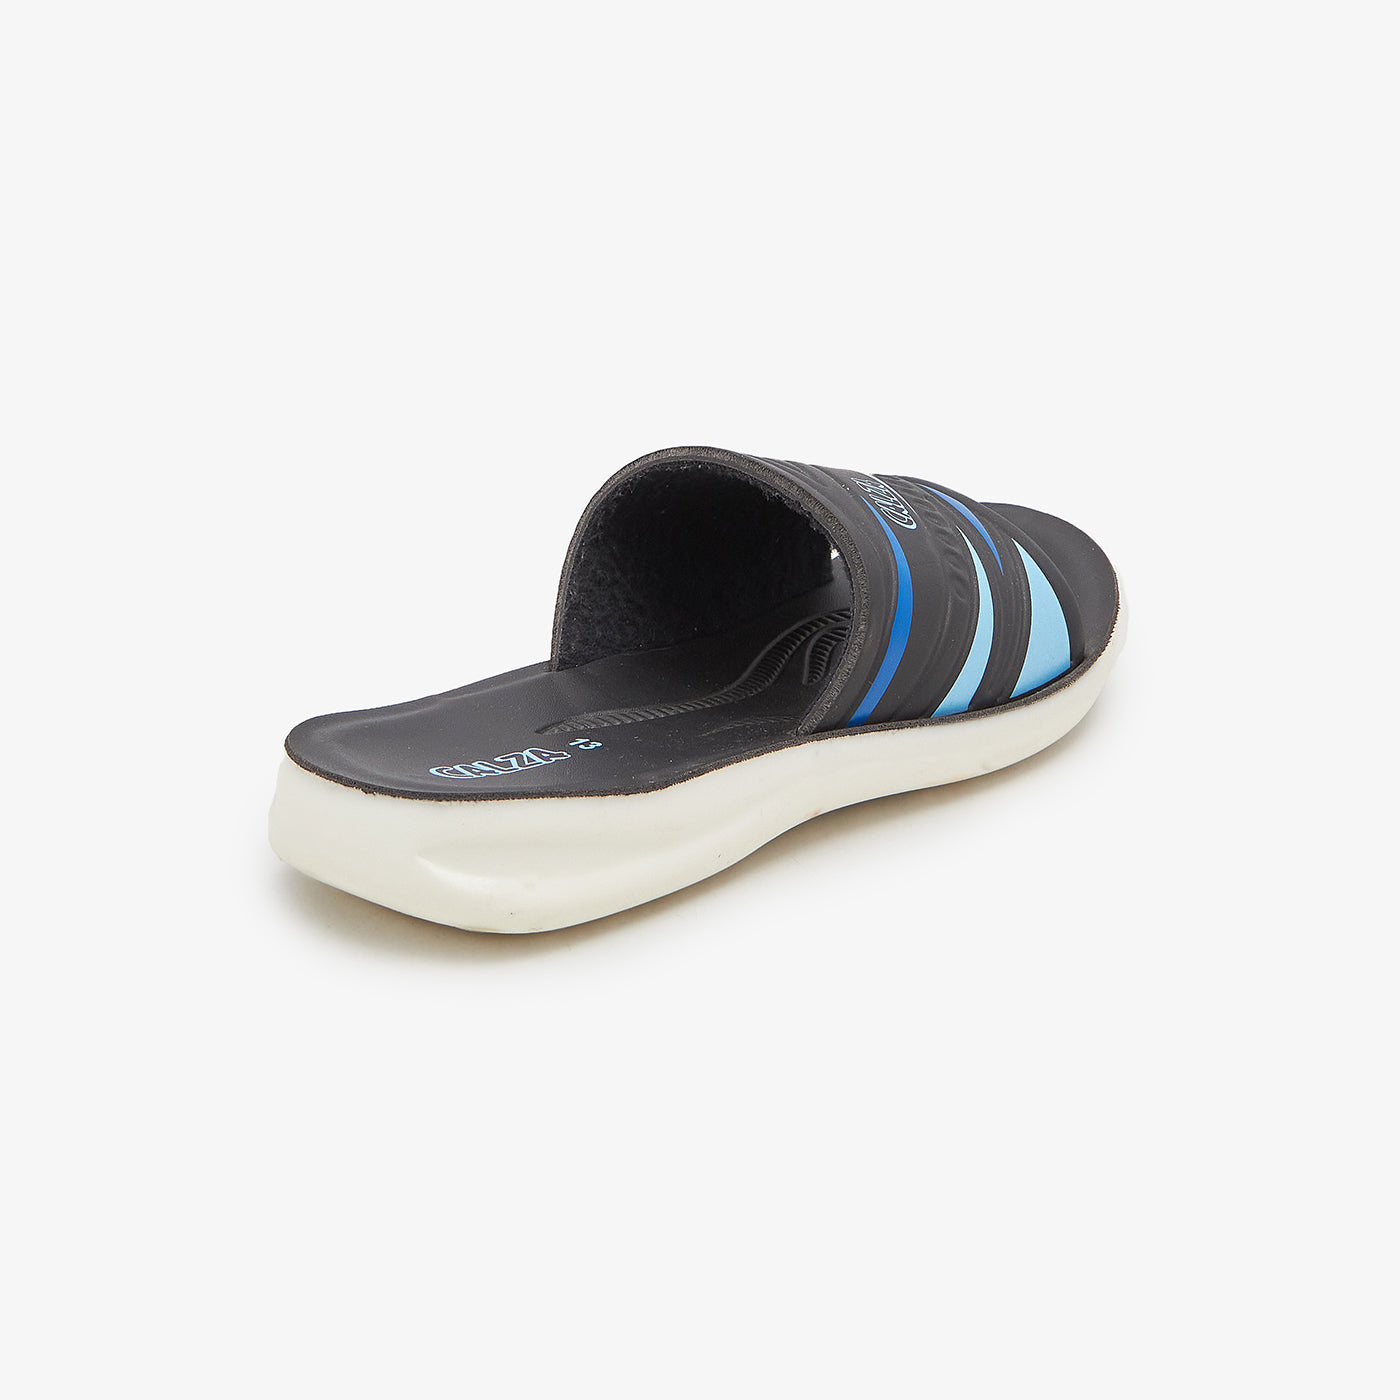 Striped Chappals for Boys